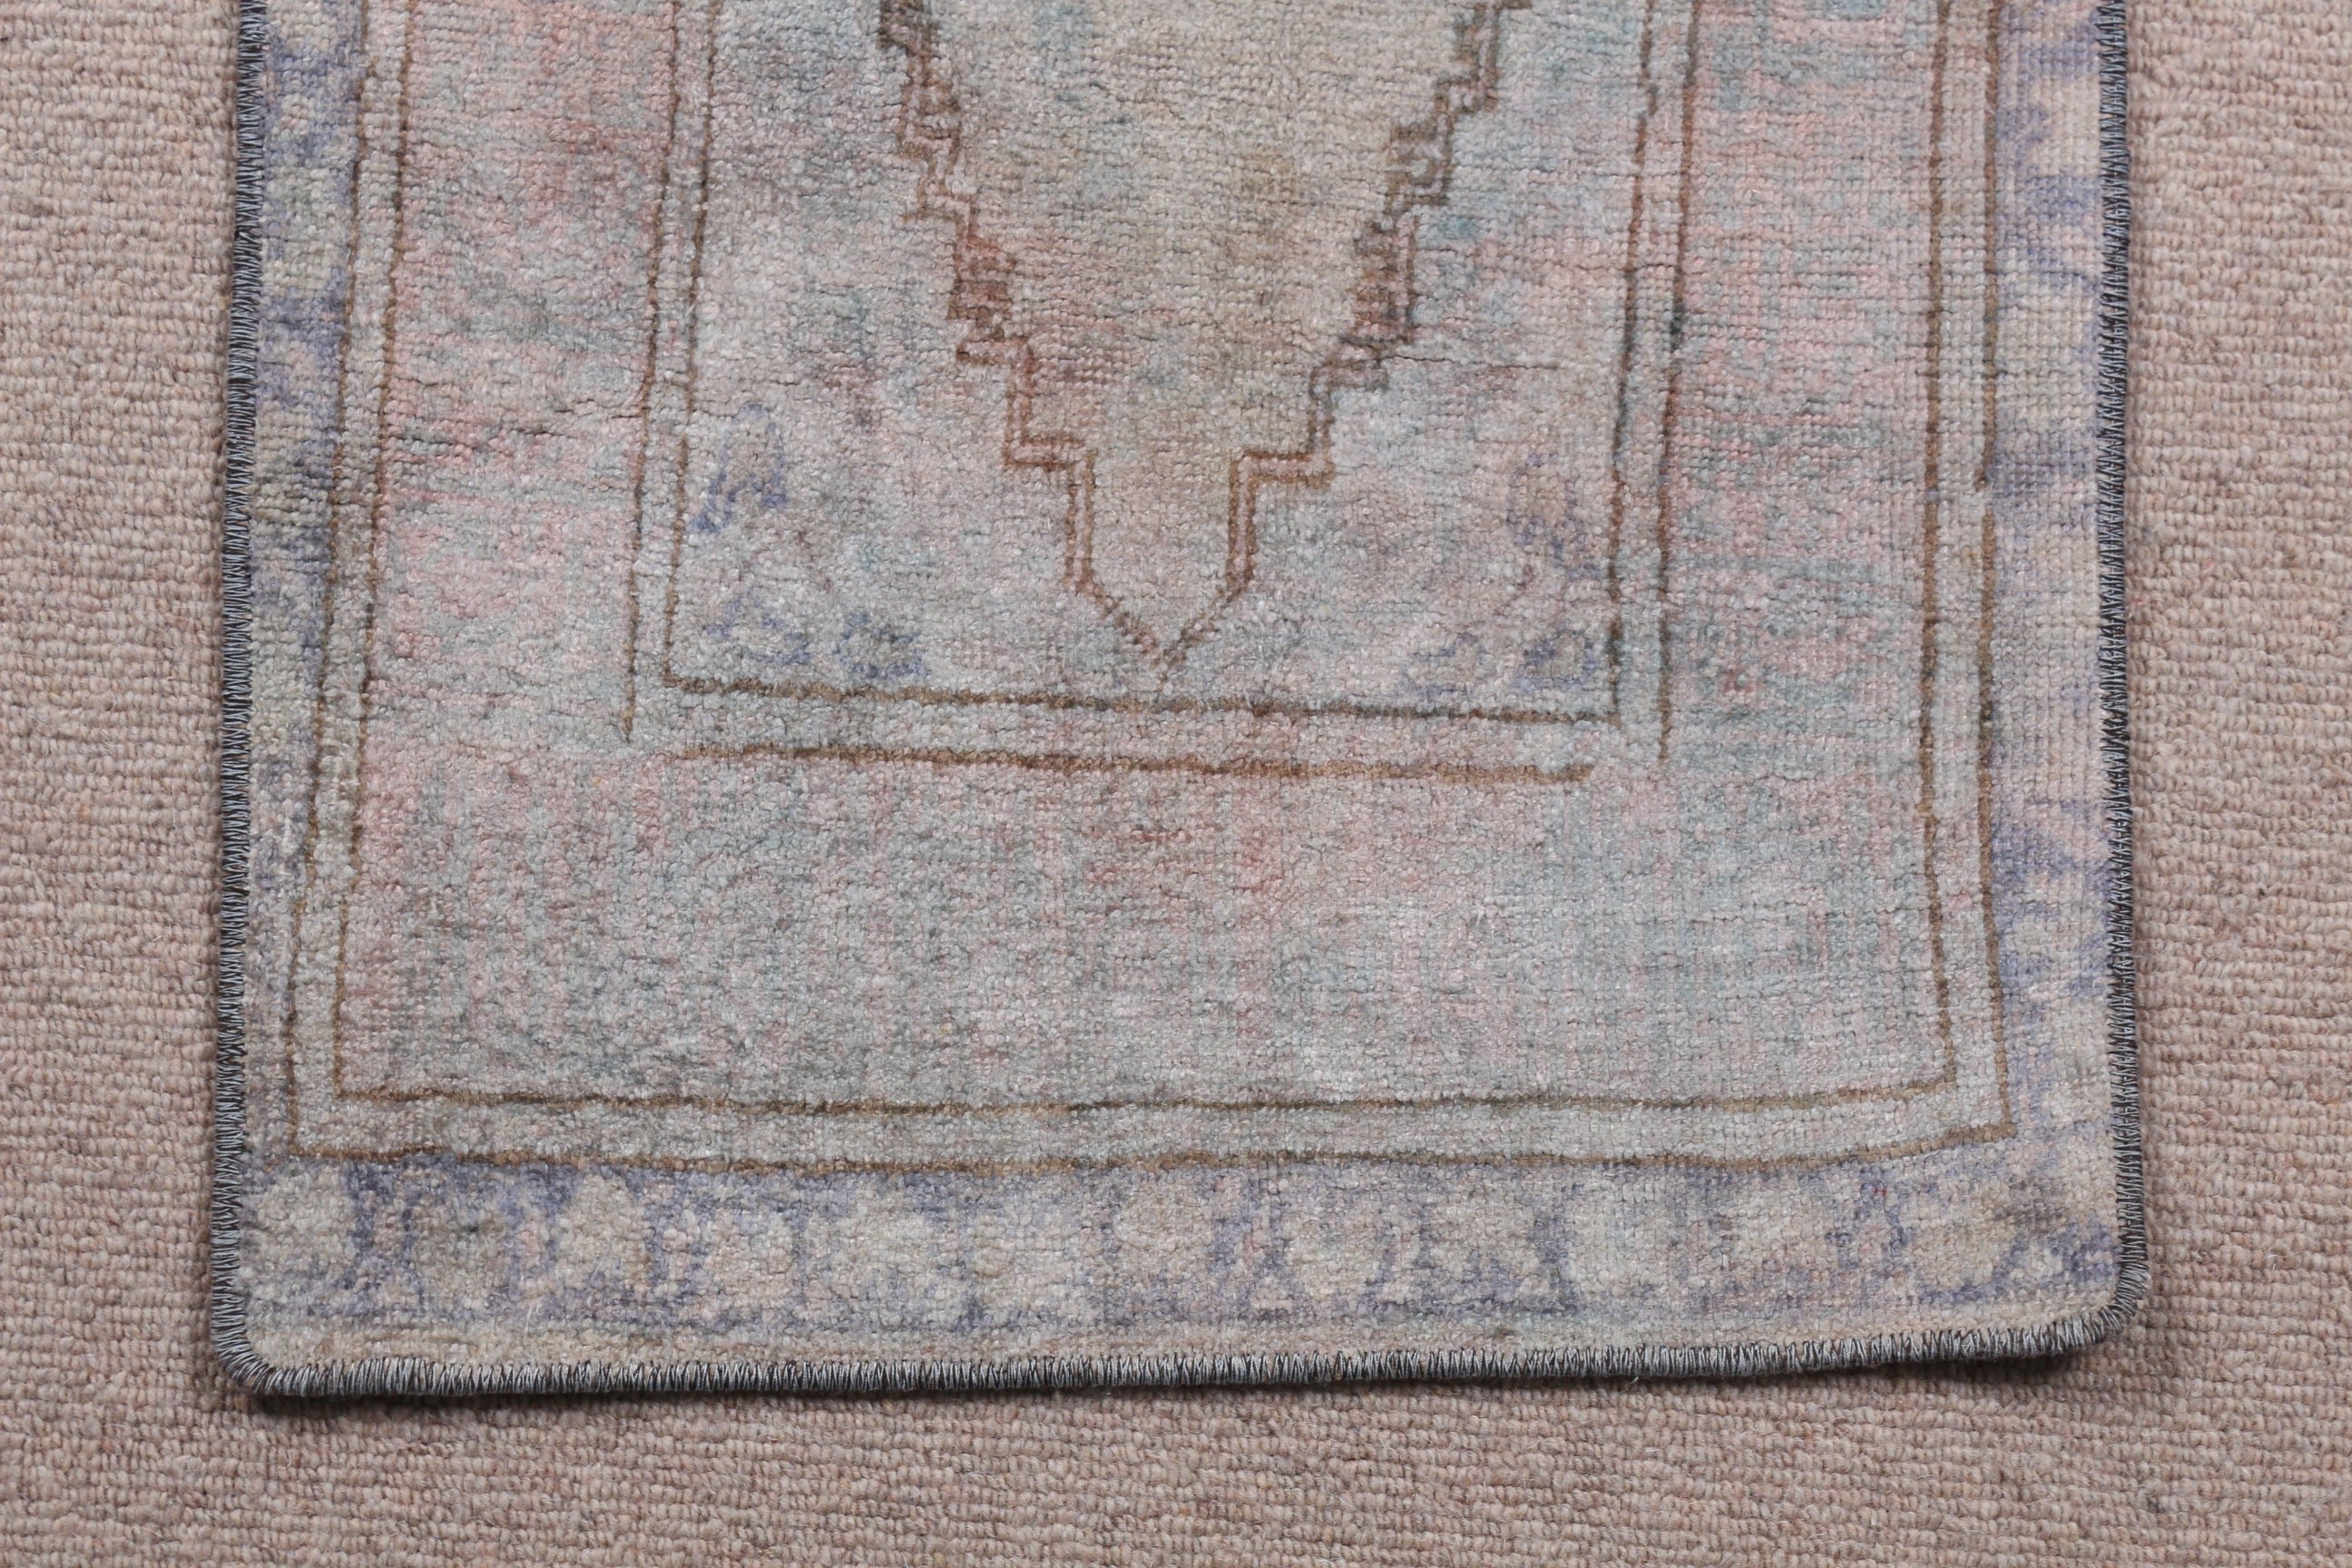 Bath Rug, Vintage Rugs, Turkish Rug, Moroccan Rug, Rugs for Kitchen, Antique Rugs, Gray Cool Rugs, Entry Rug, Dorm Rug, 1.5x3 ft Small Rugs